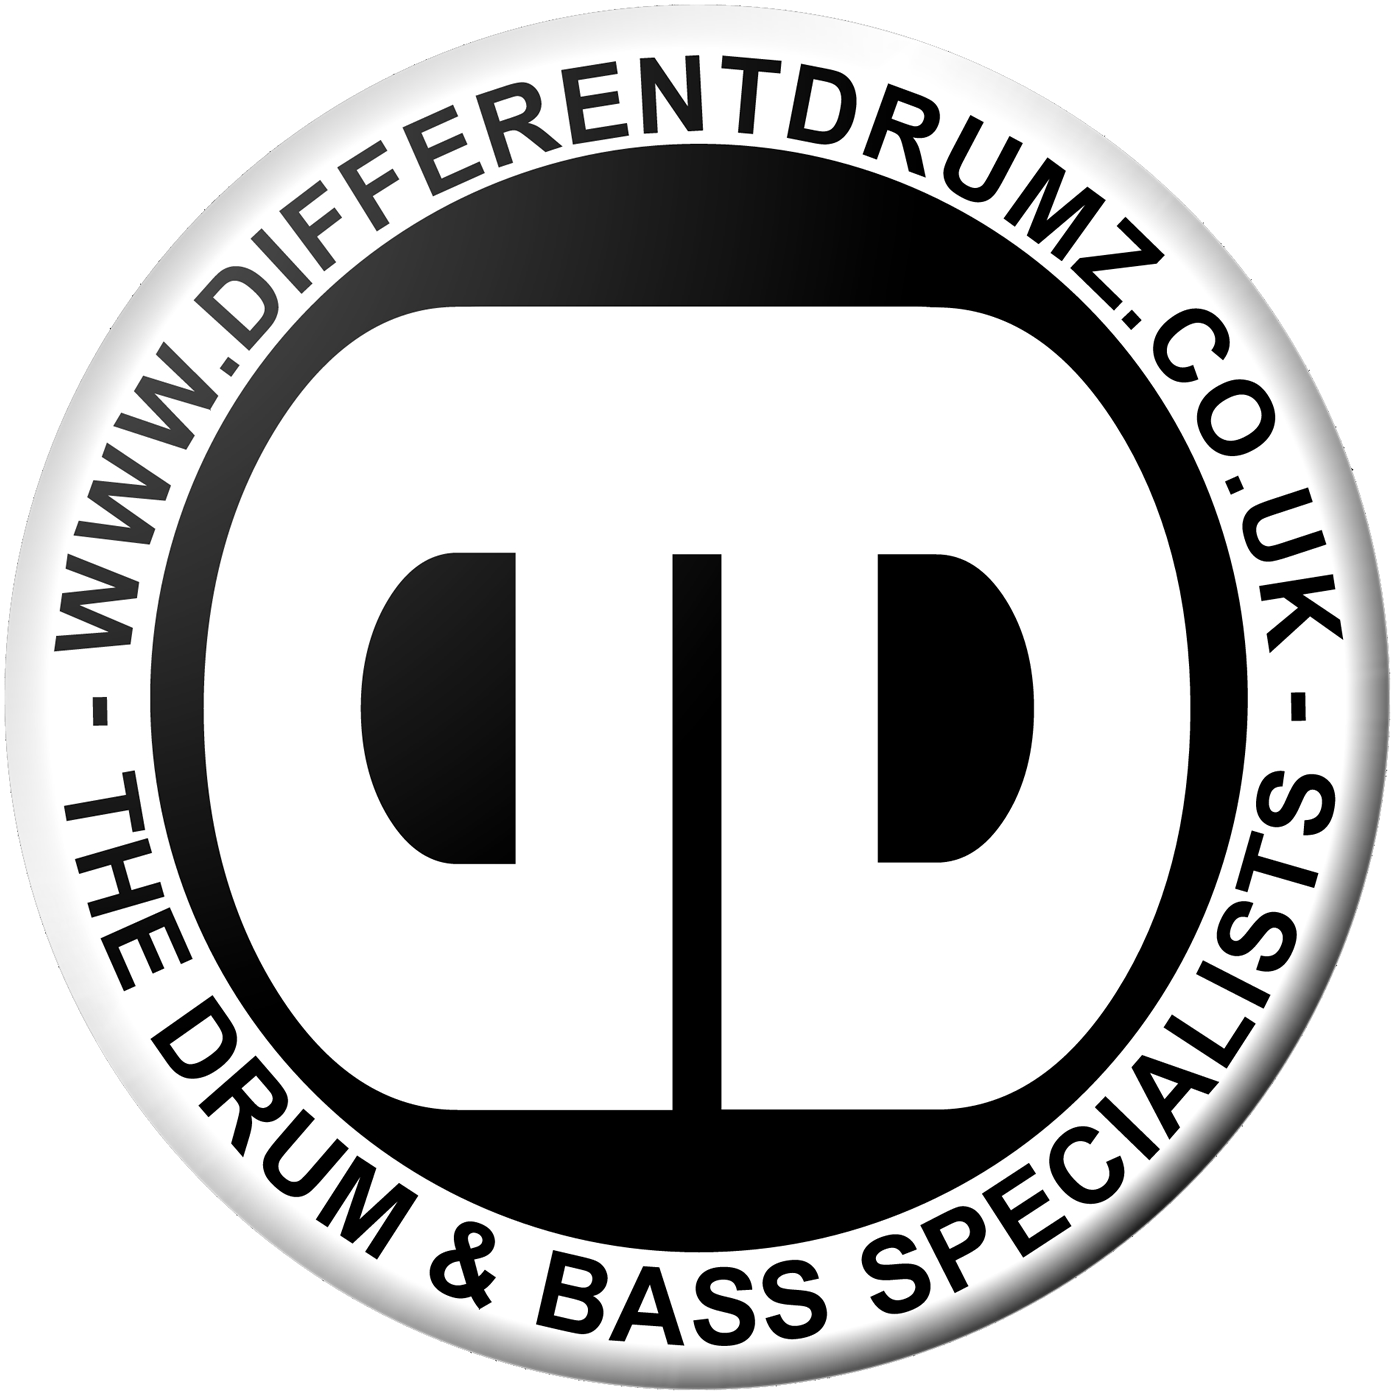 The Different Drumz DnB Podcast Series